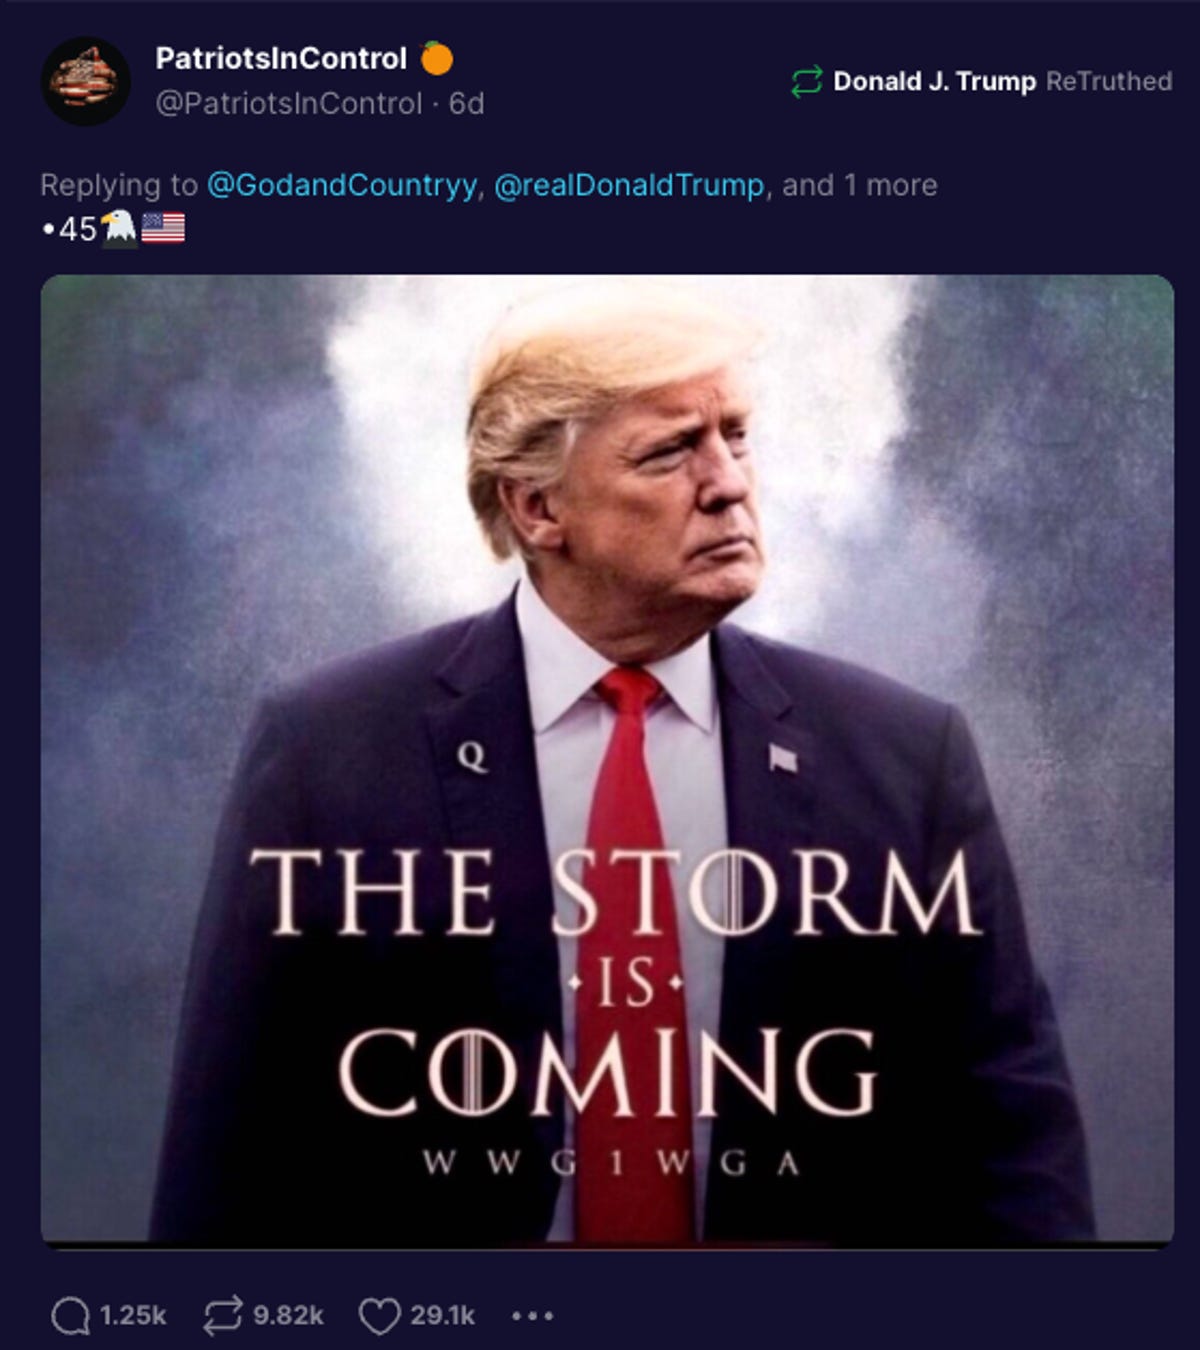 a graphic of donald trump wearing a Q lapel pin on his suit with the word the storm is coming displayed over the image